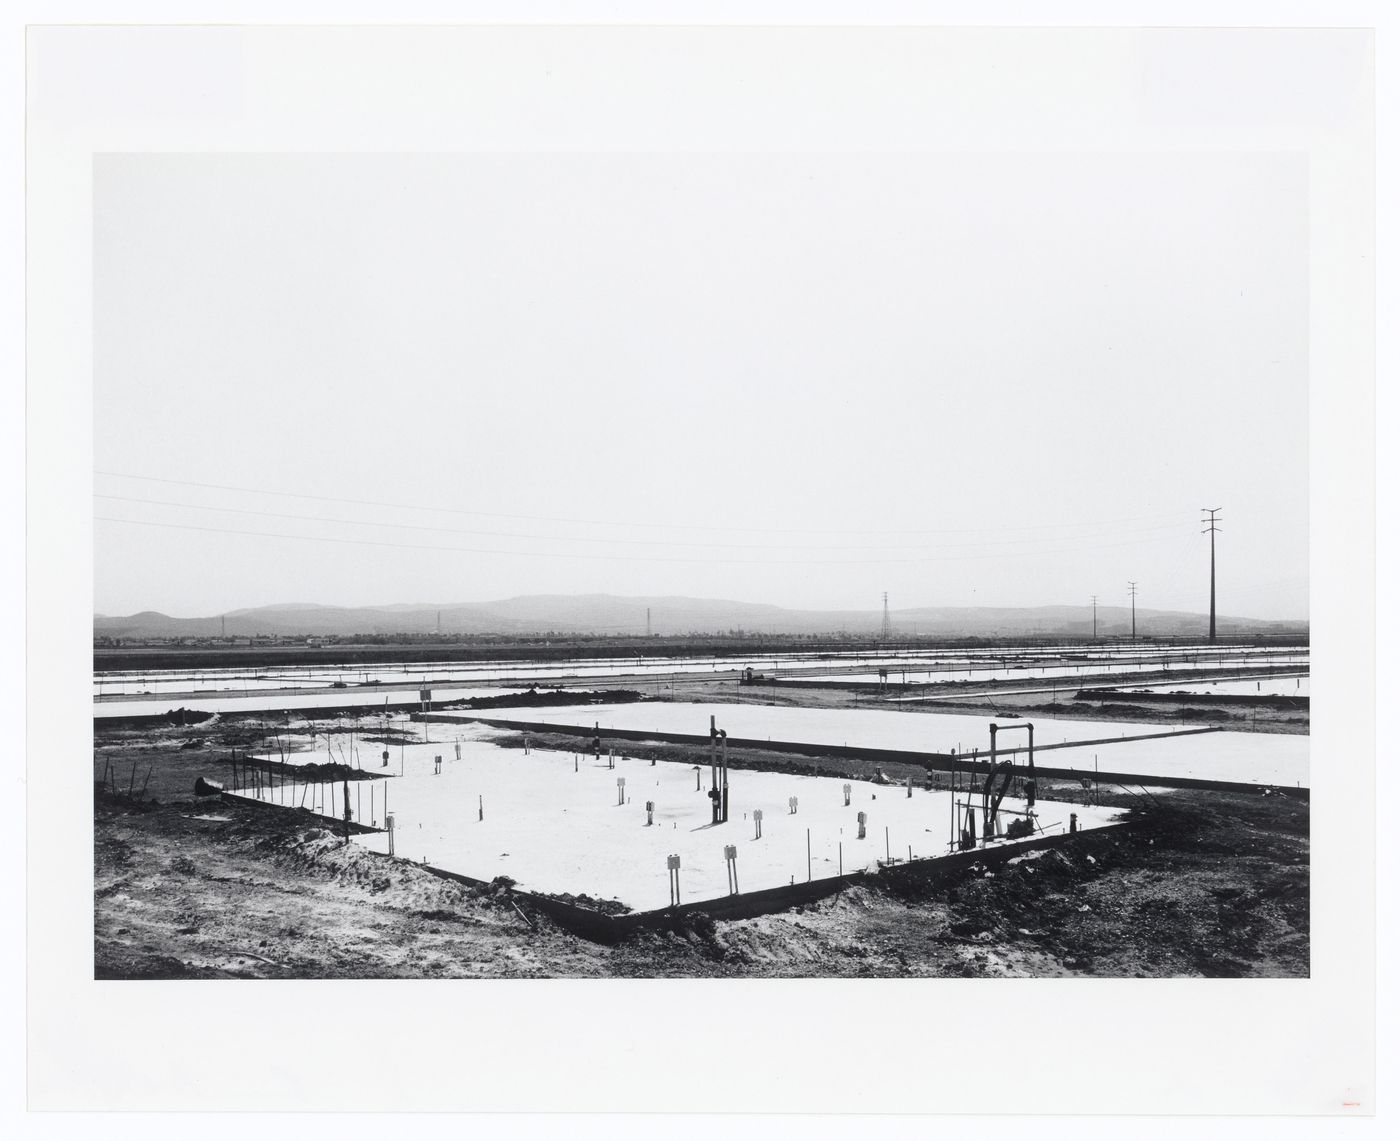 View of foundation construction for Many Warehouses, 2892 Kelvin, Irvine, California, United States, from the series “The new Industrial Parks near Irvine, California”